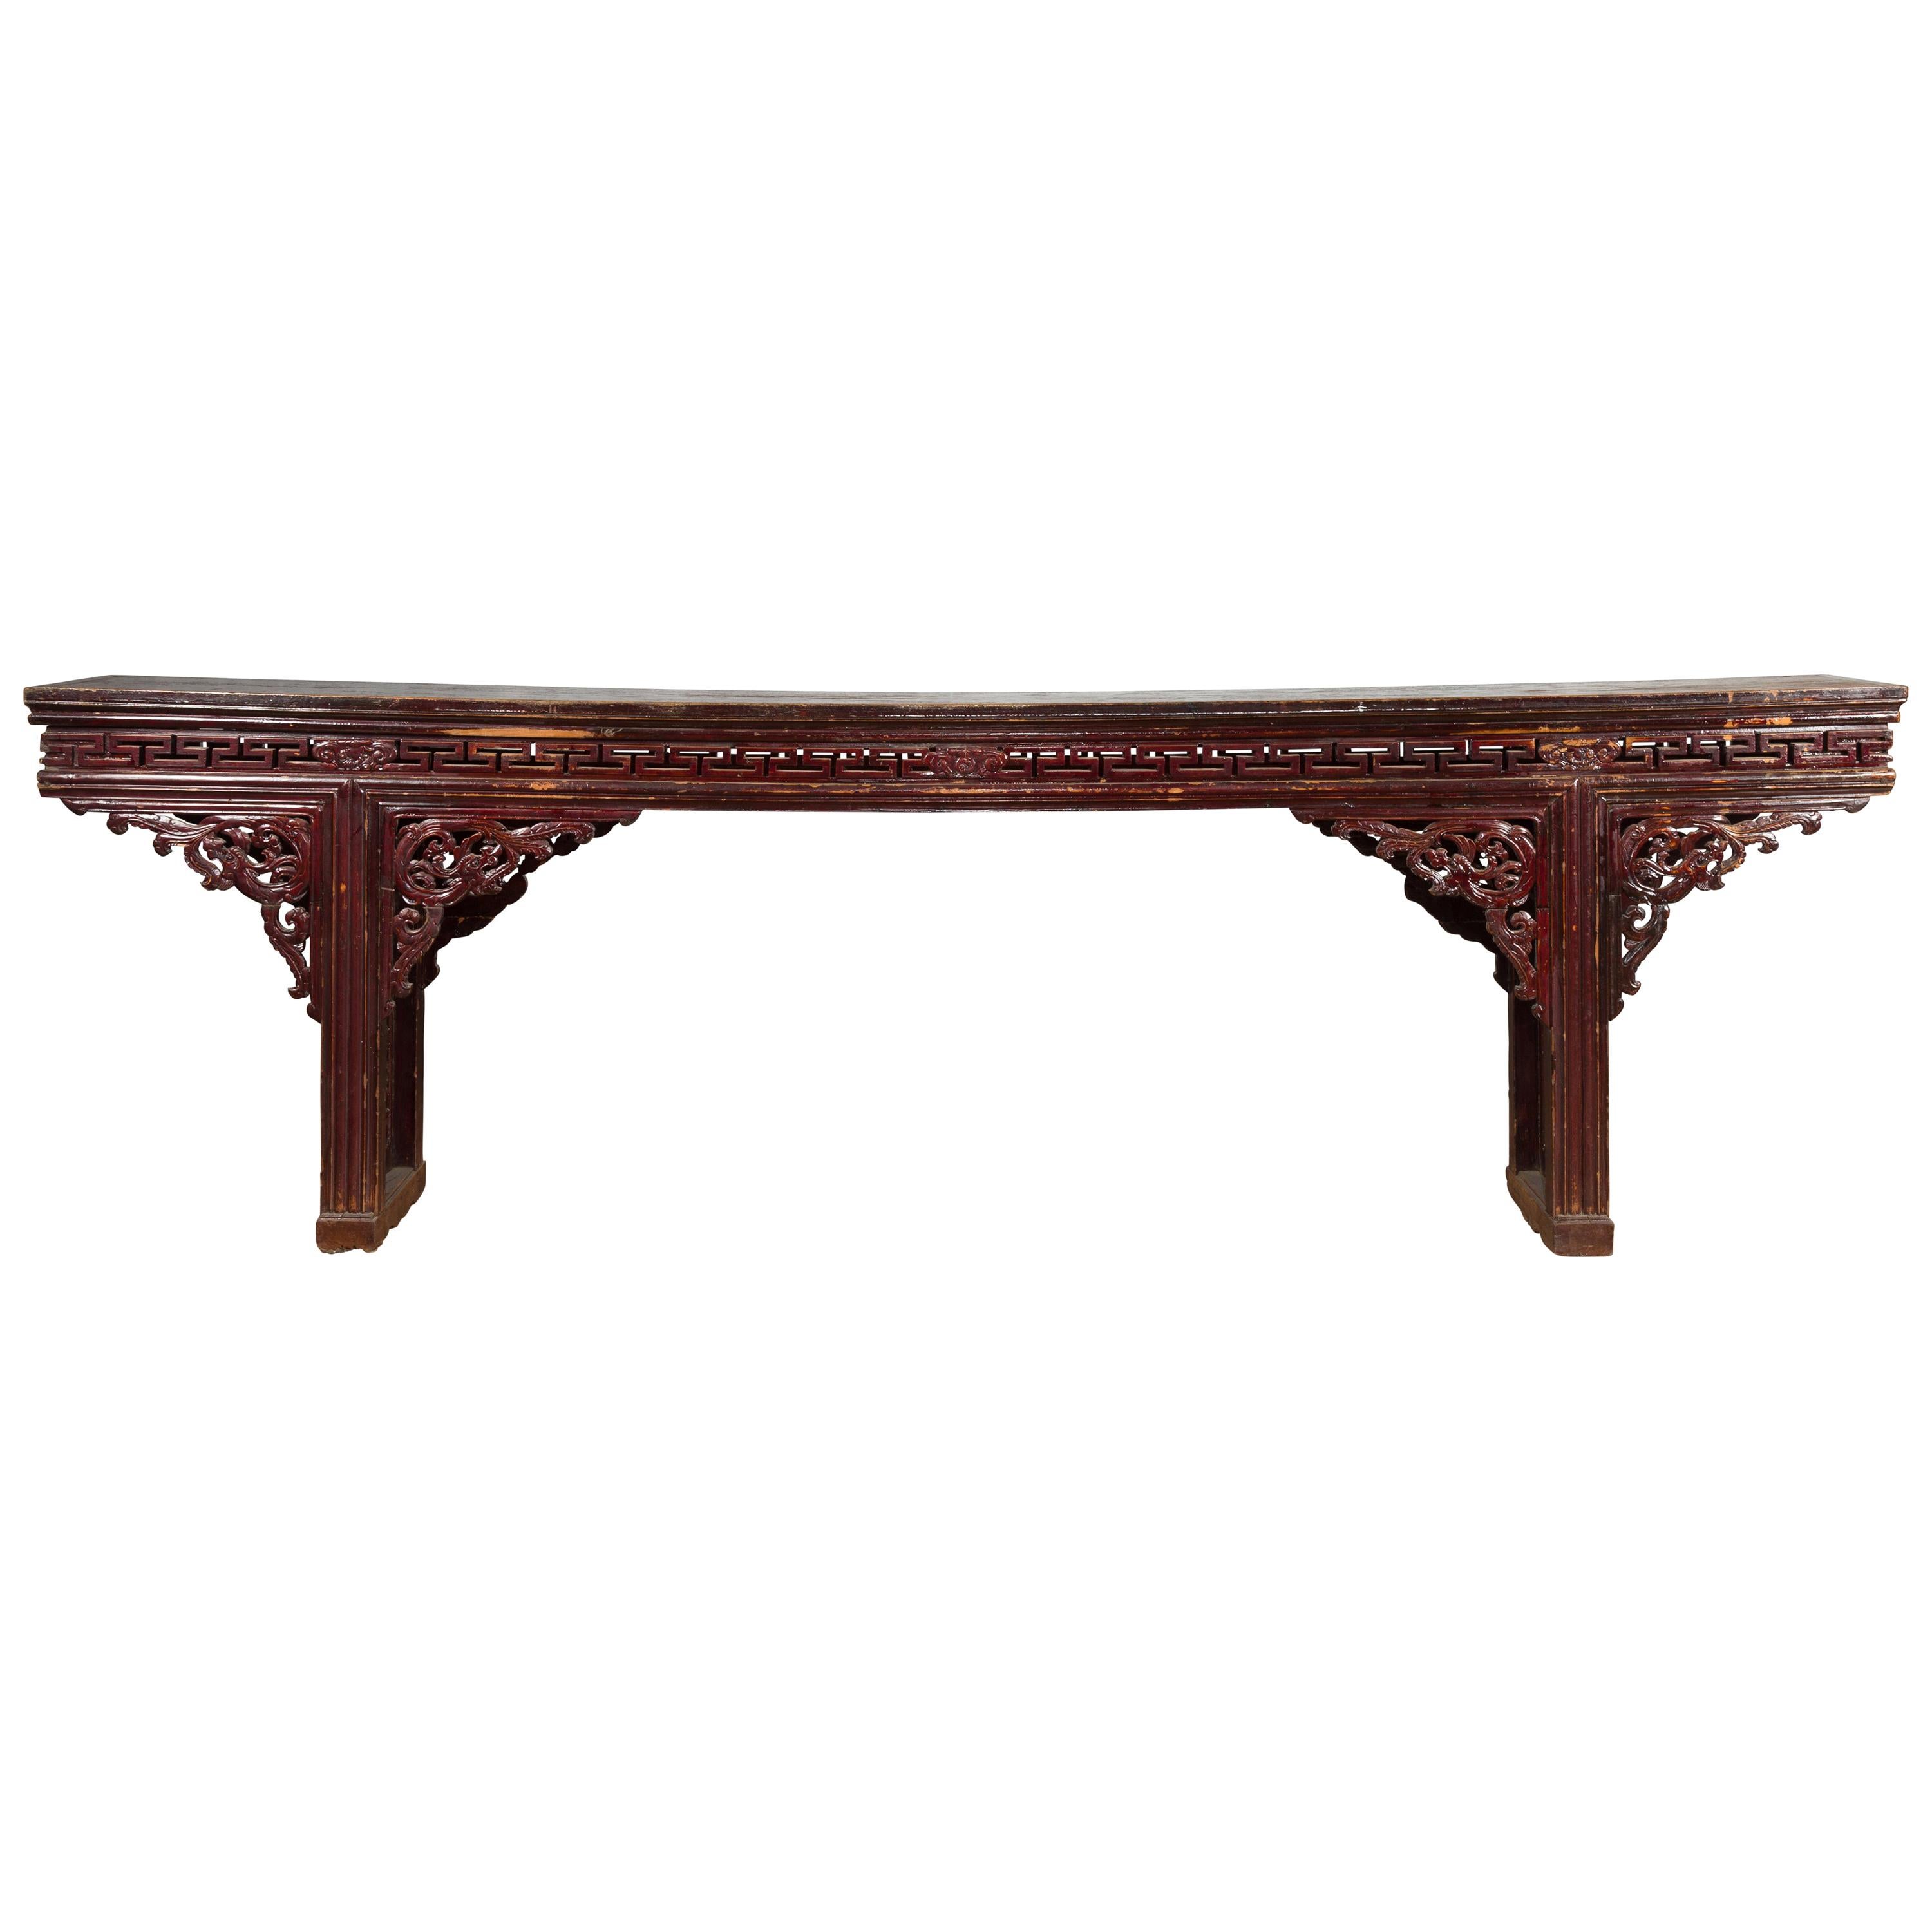 Large Qing Dynasty Chinese Altar Console Table with Fretwork and Dragon Motifs For Sale